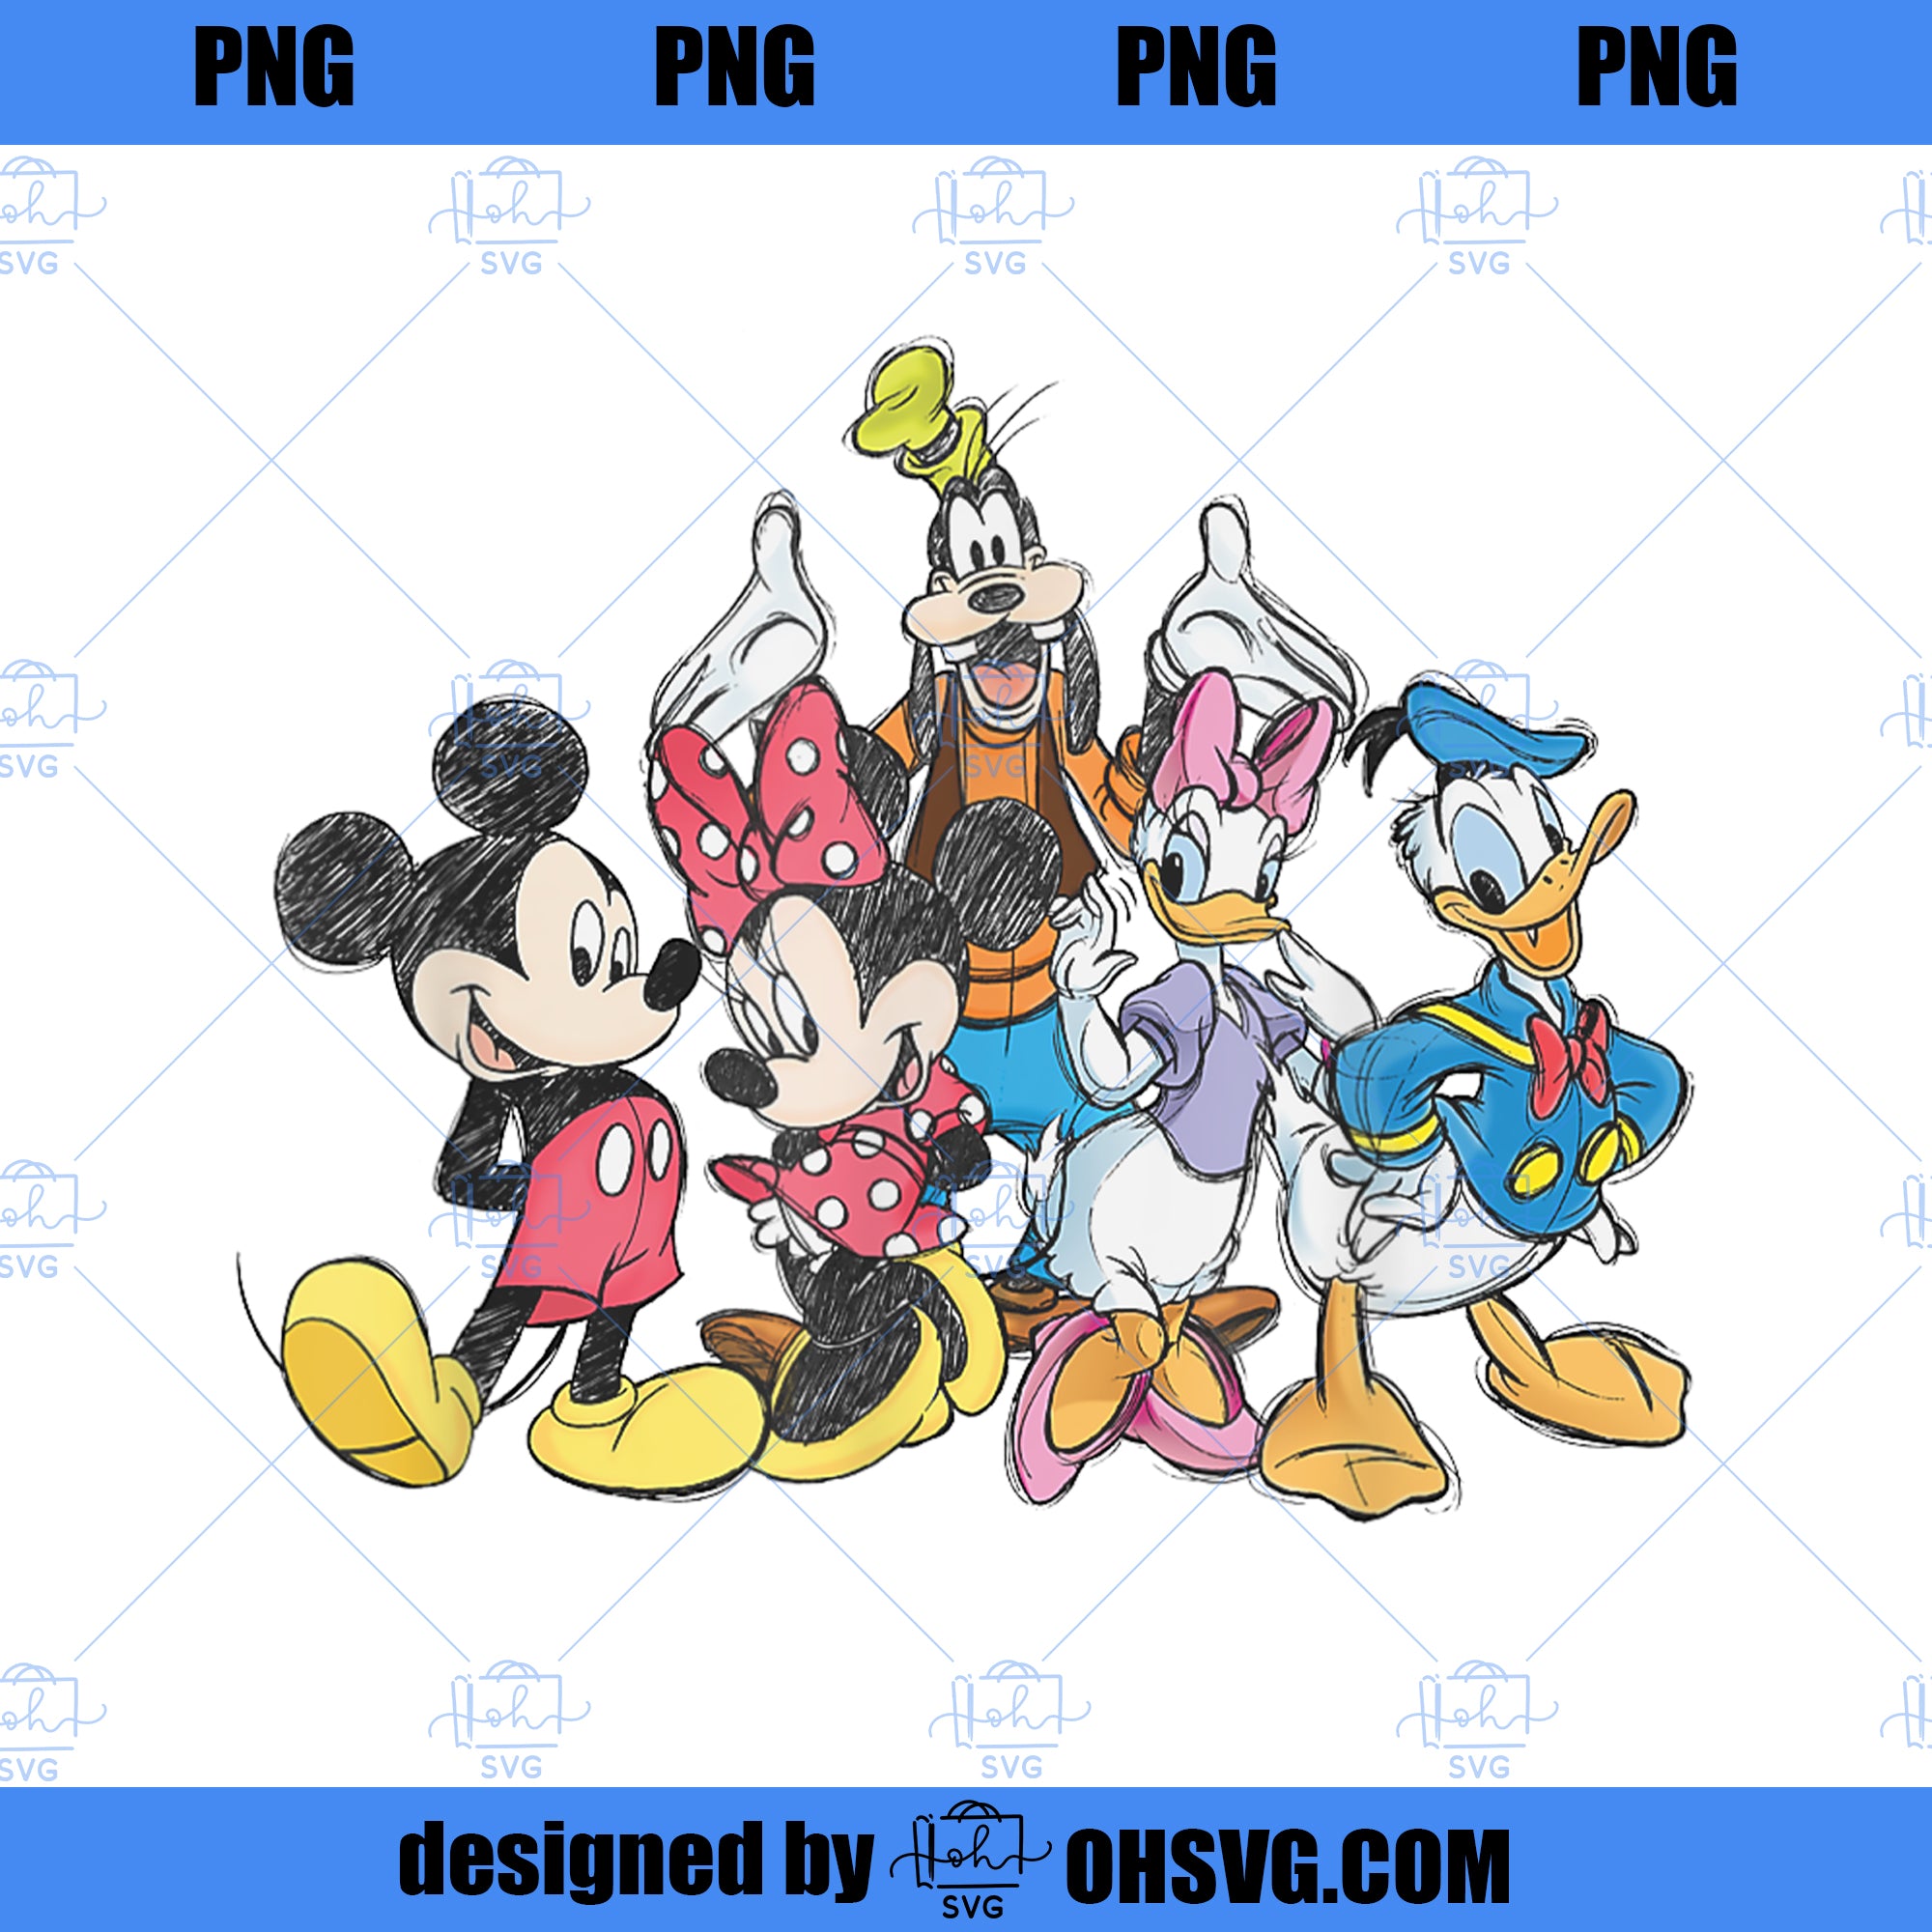 Disney Mickey Mouse and Friends PNG, Disney PNG, Mickey Friends PNG